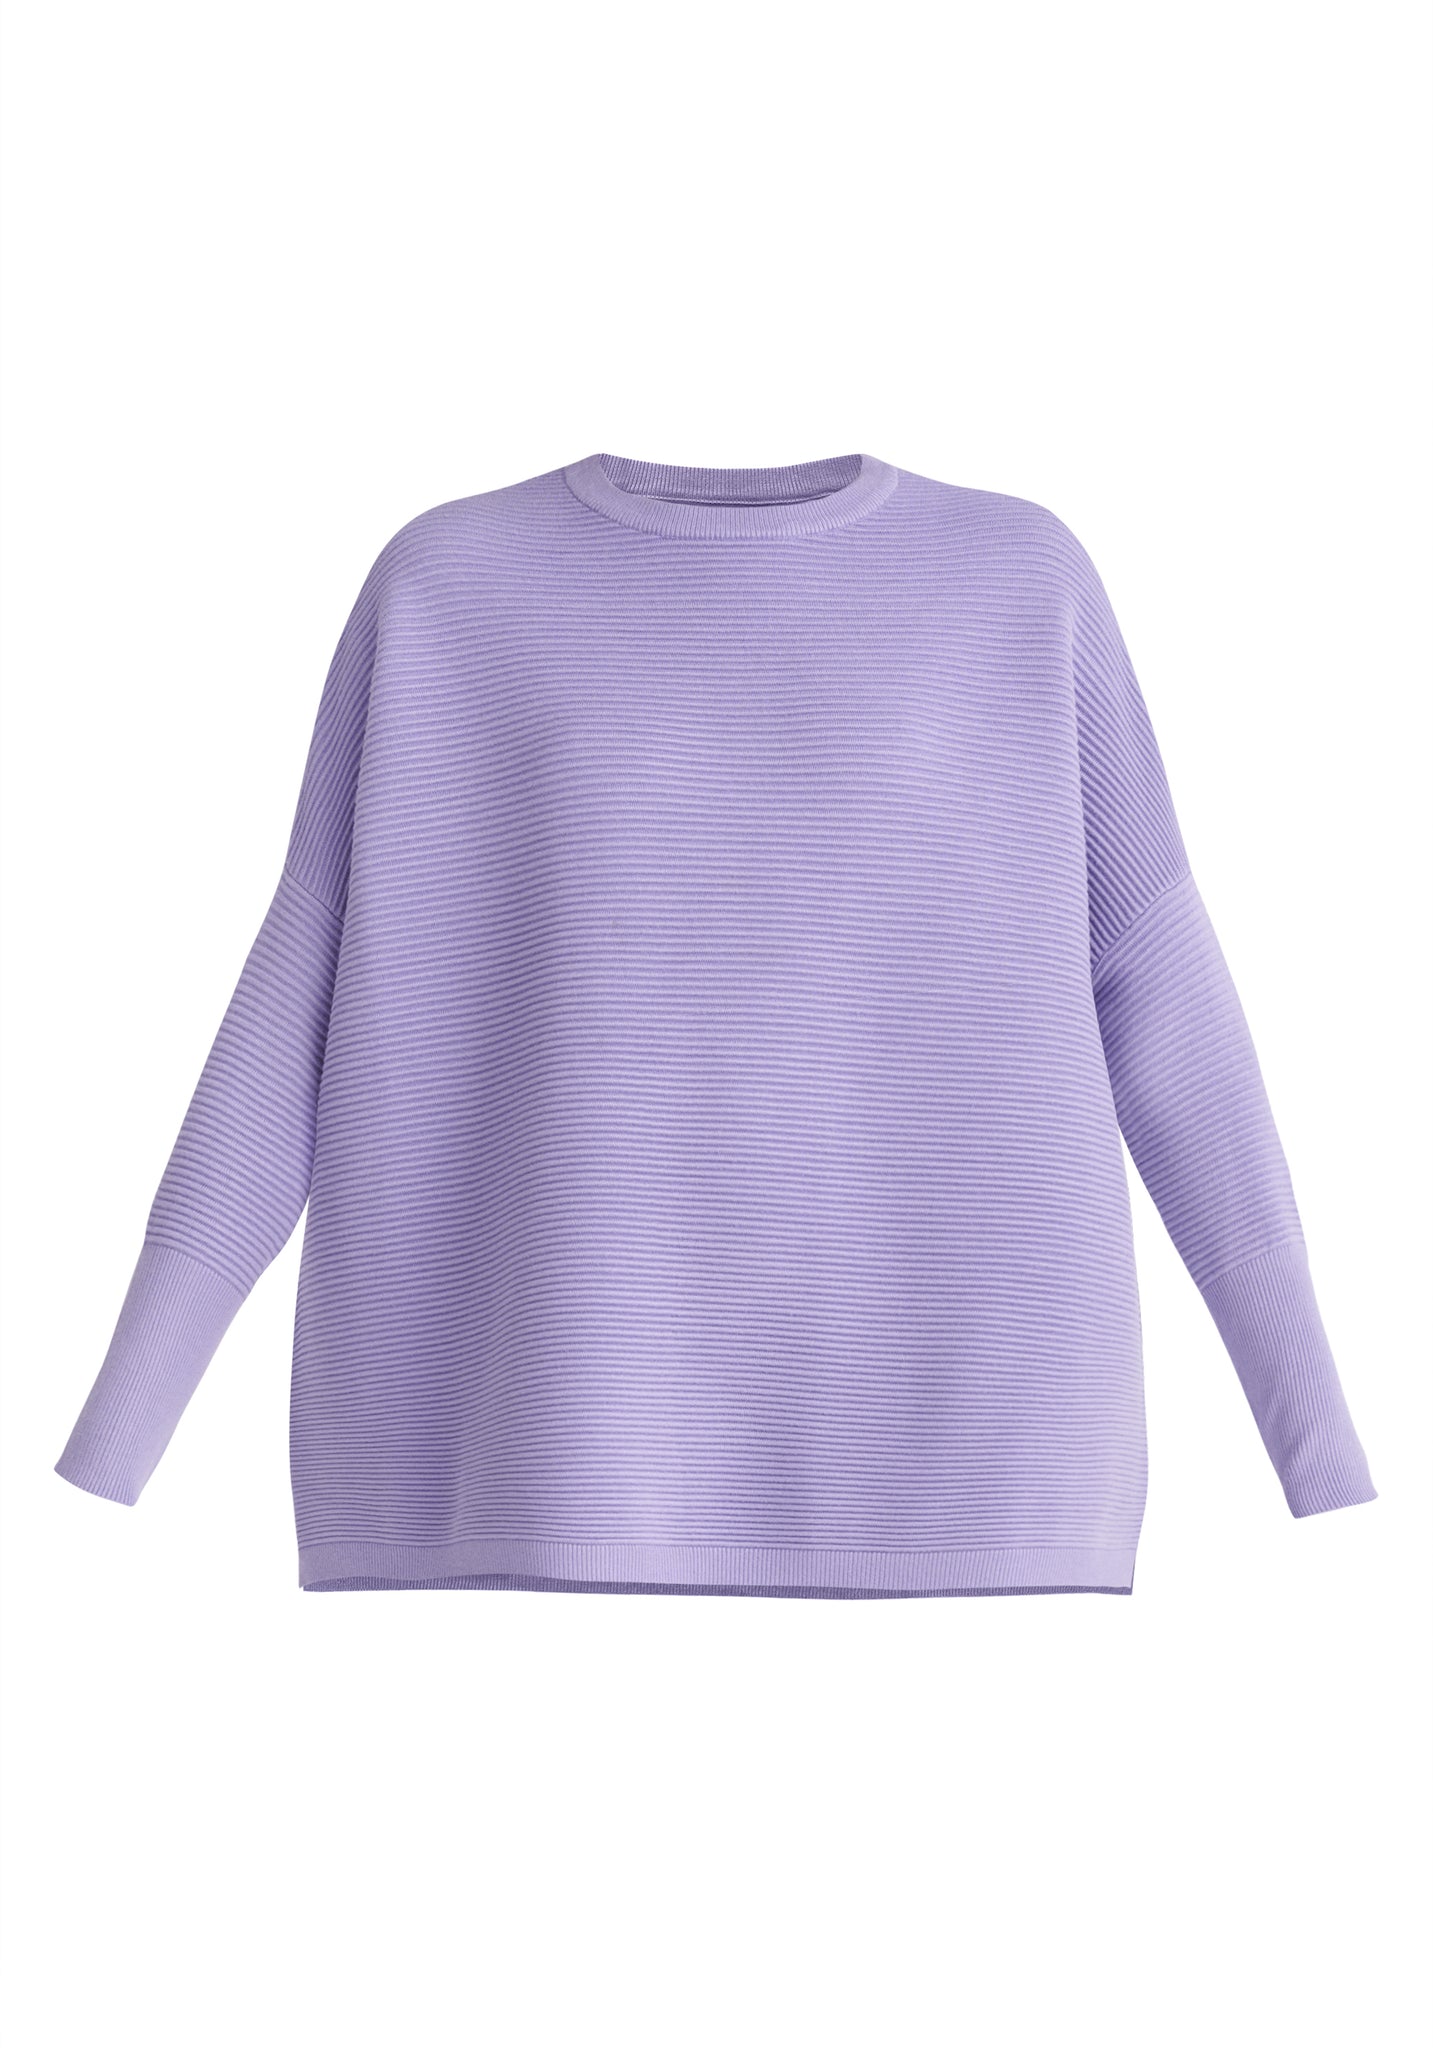 Paisie Oversized Ribbed Knit Jumper in Lilac | Knitwear | Paisie